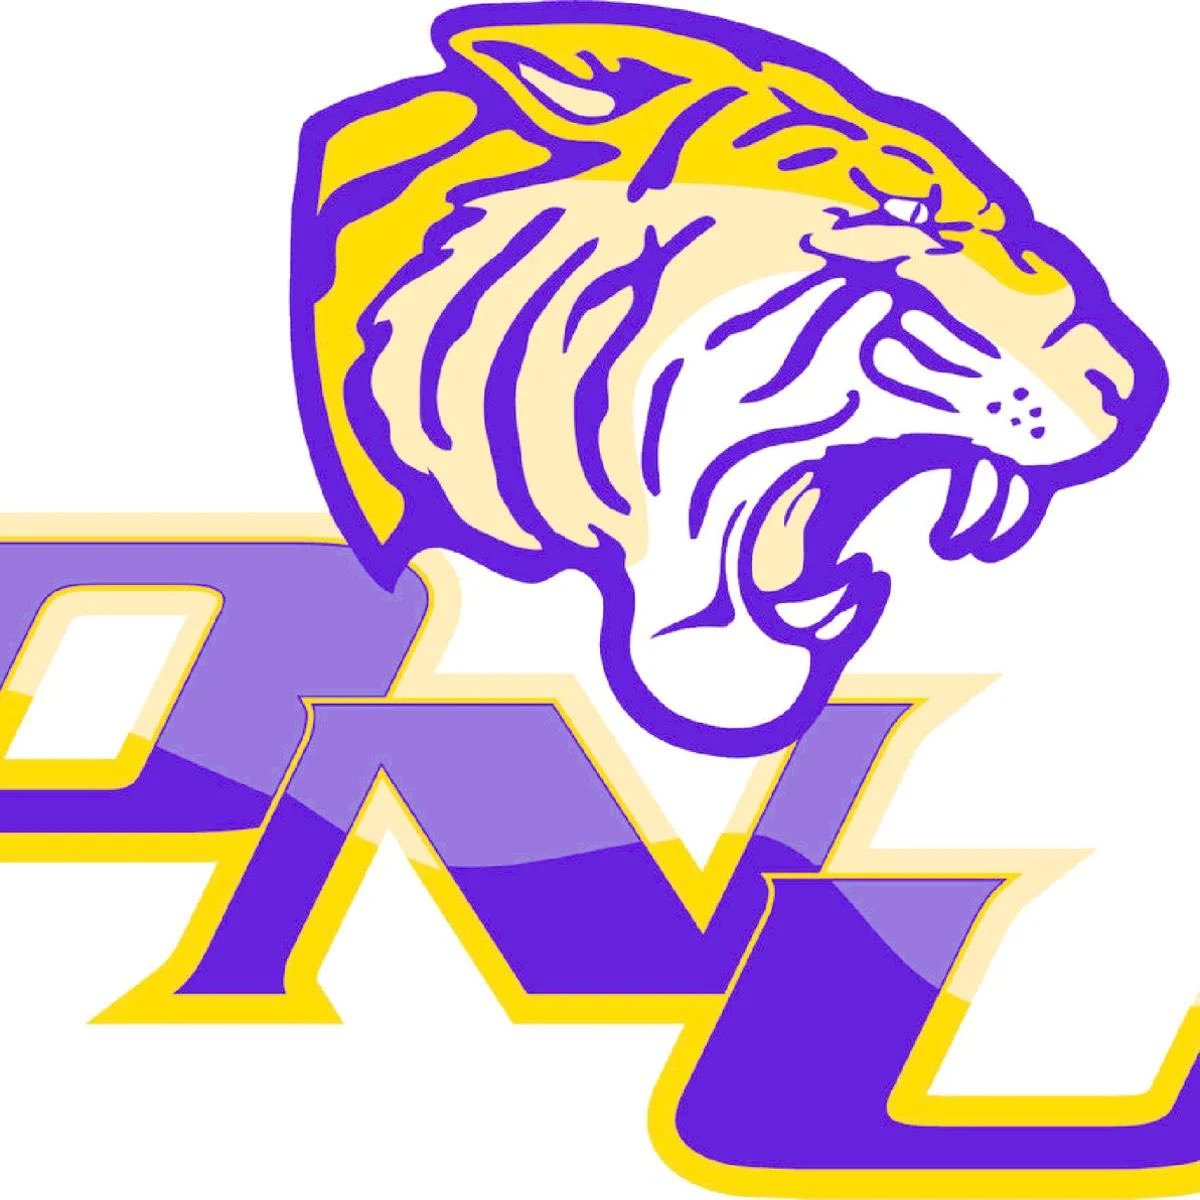 I am blessed to receive my first offer from Olivet Nazarene university after a great day at camp! @ONAZFootball @north_recruit @CoachGarde @NGHSFootball #AGTG